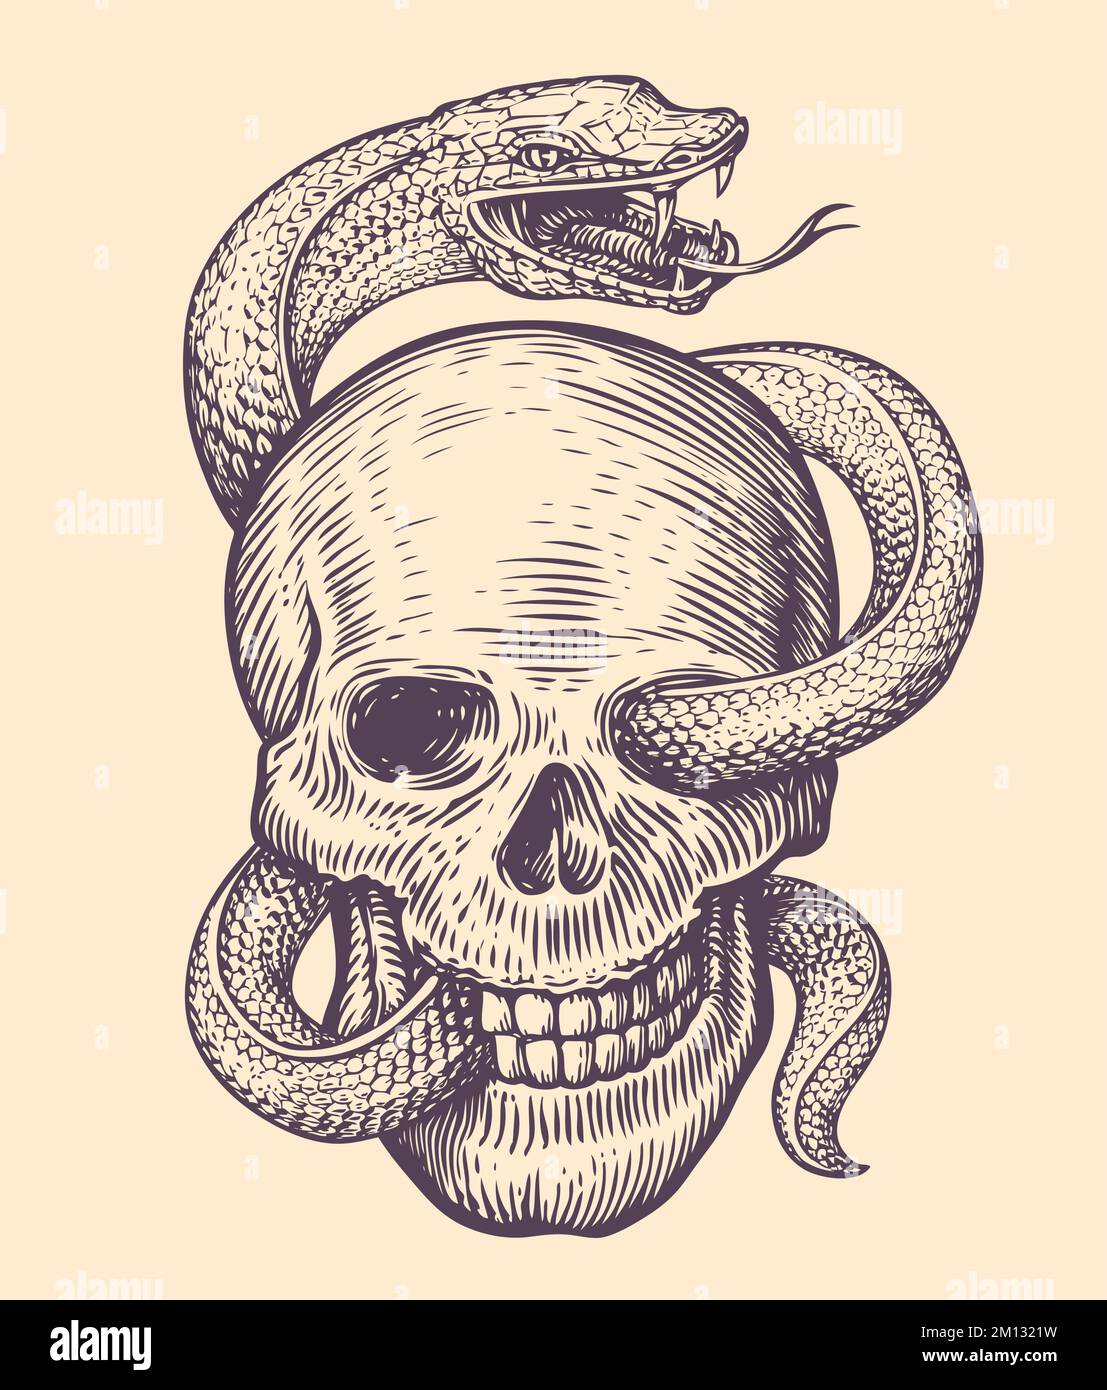 Snake wraps around human skull. Hand drawn sketch in vintage engraving style. Tattoo vector illustration Stock Vector